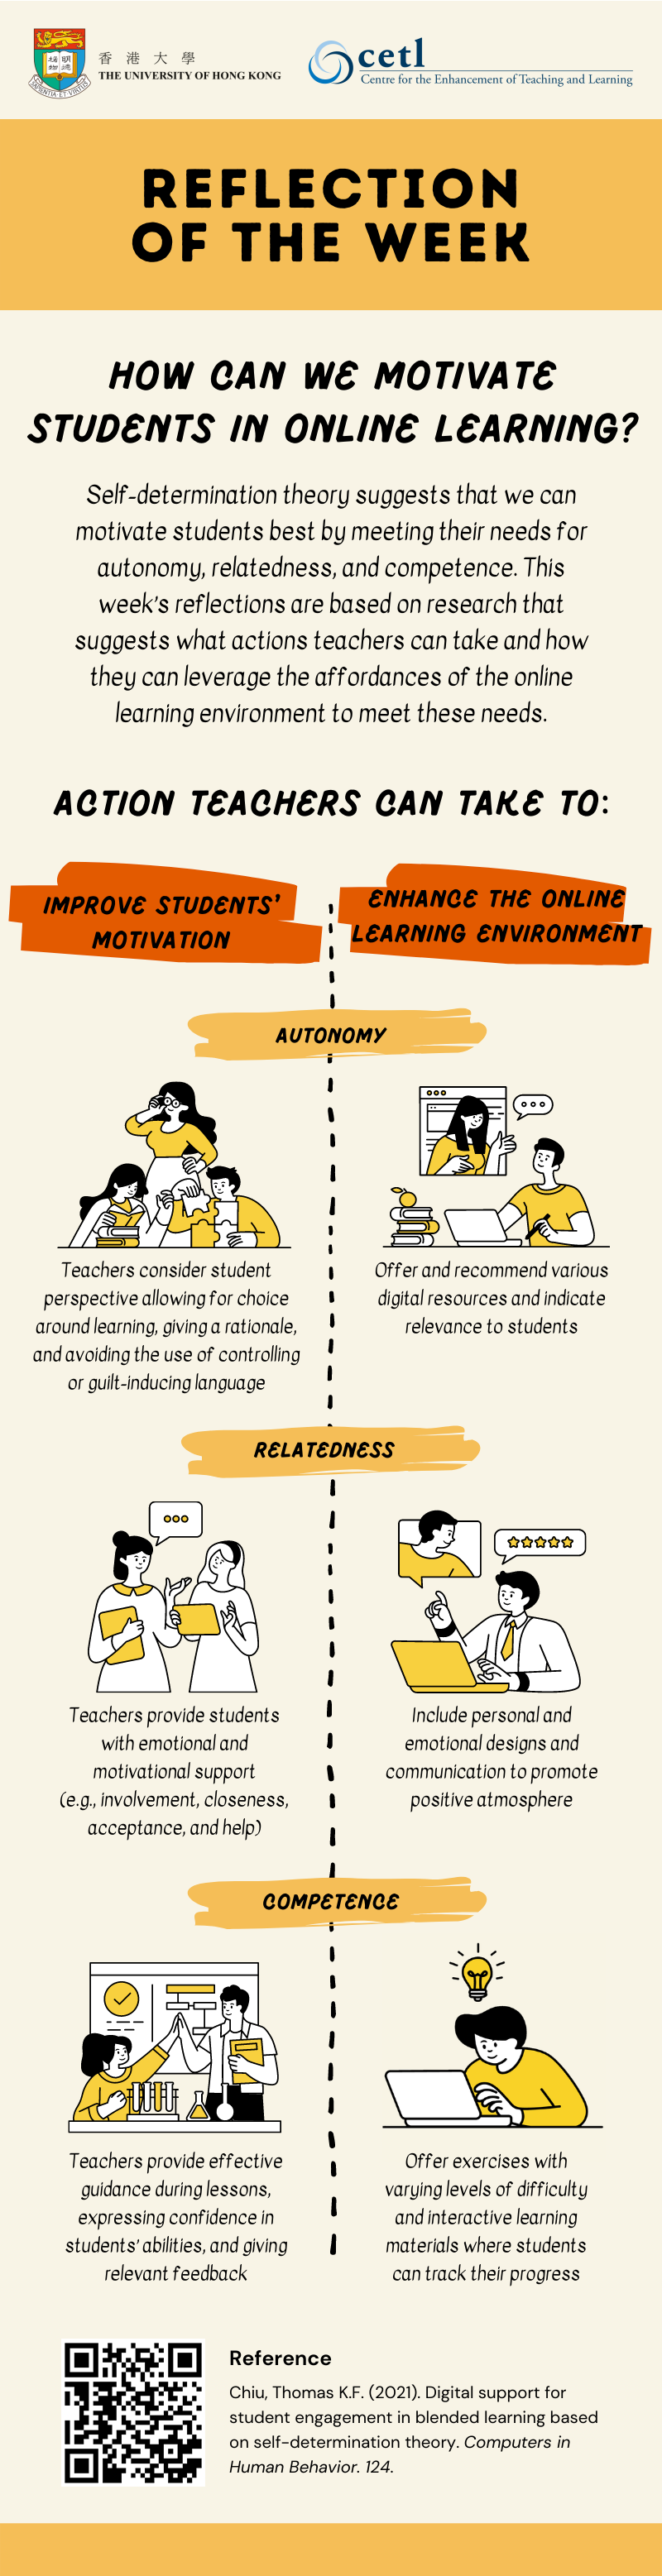 How can we motivate students in online learning? 